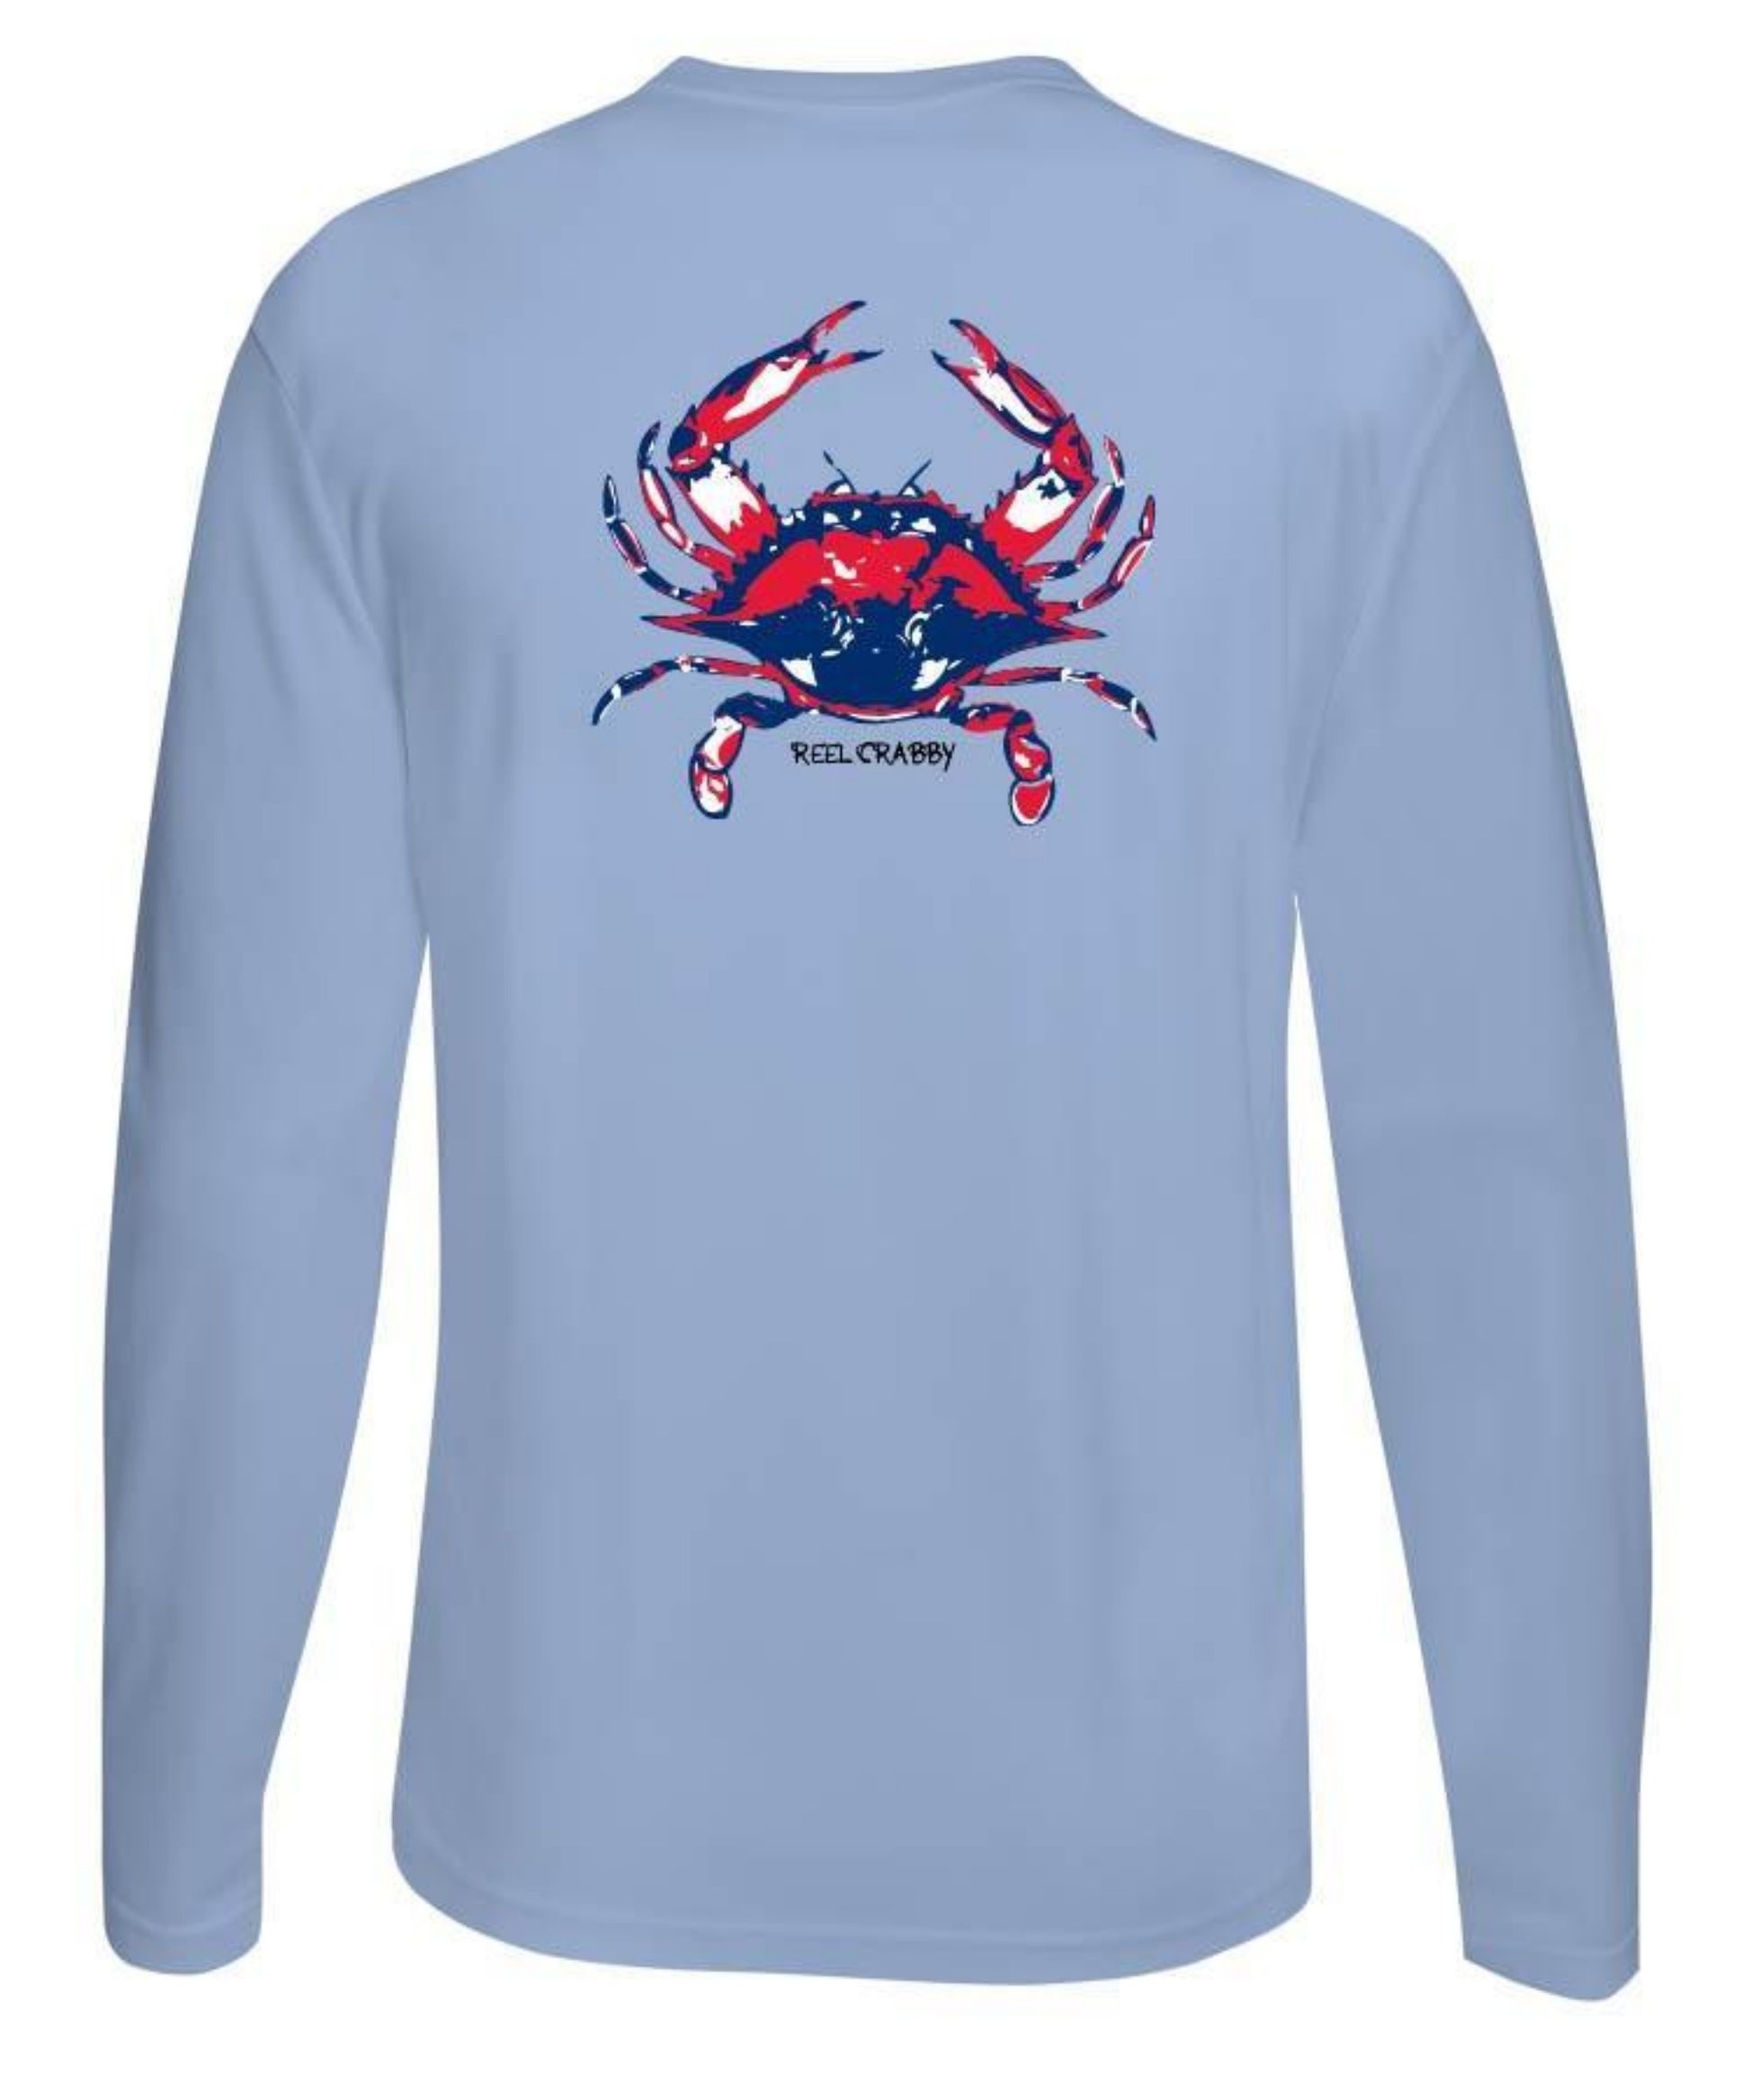 American Blue Crab -Reel Crabby Performance Dry-fit Long Sleeve Shirt with 50+ UV Sun Protection in Light Blue